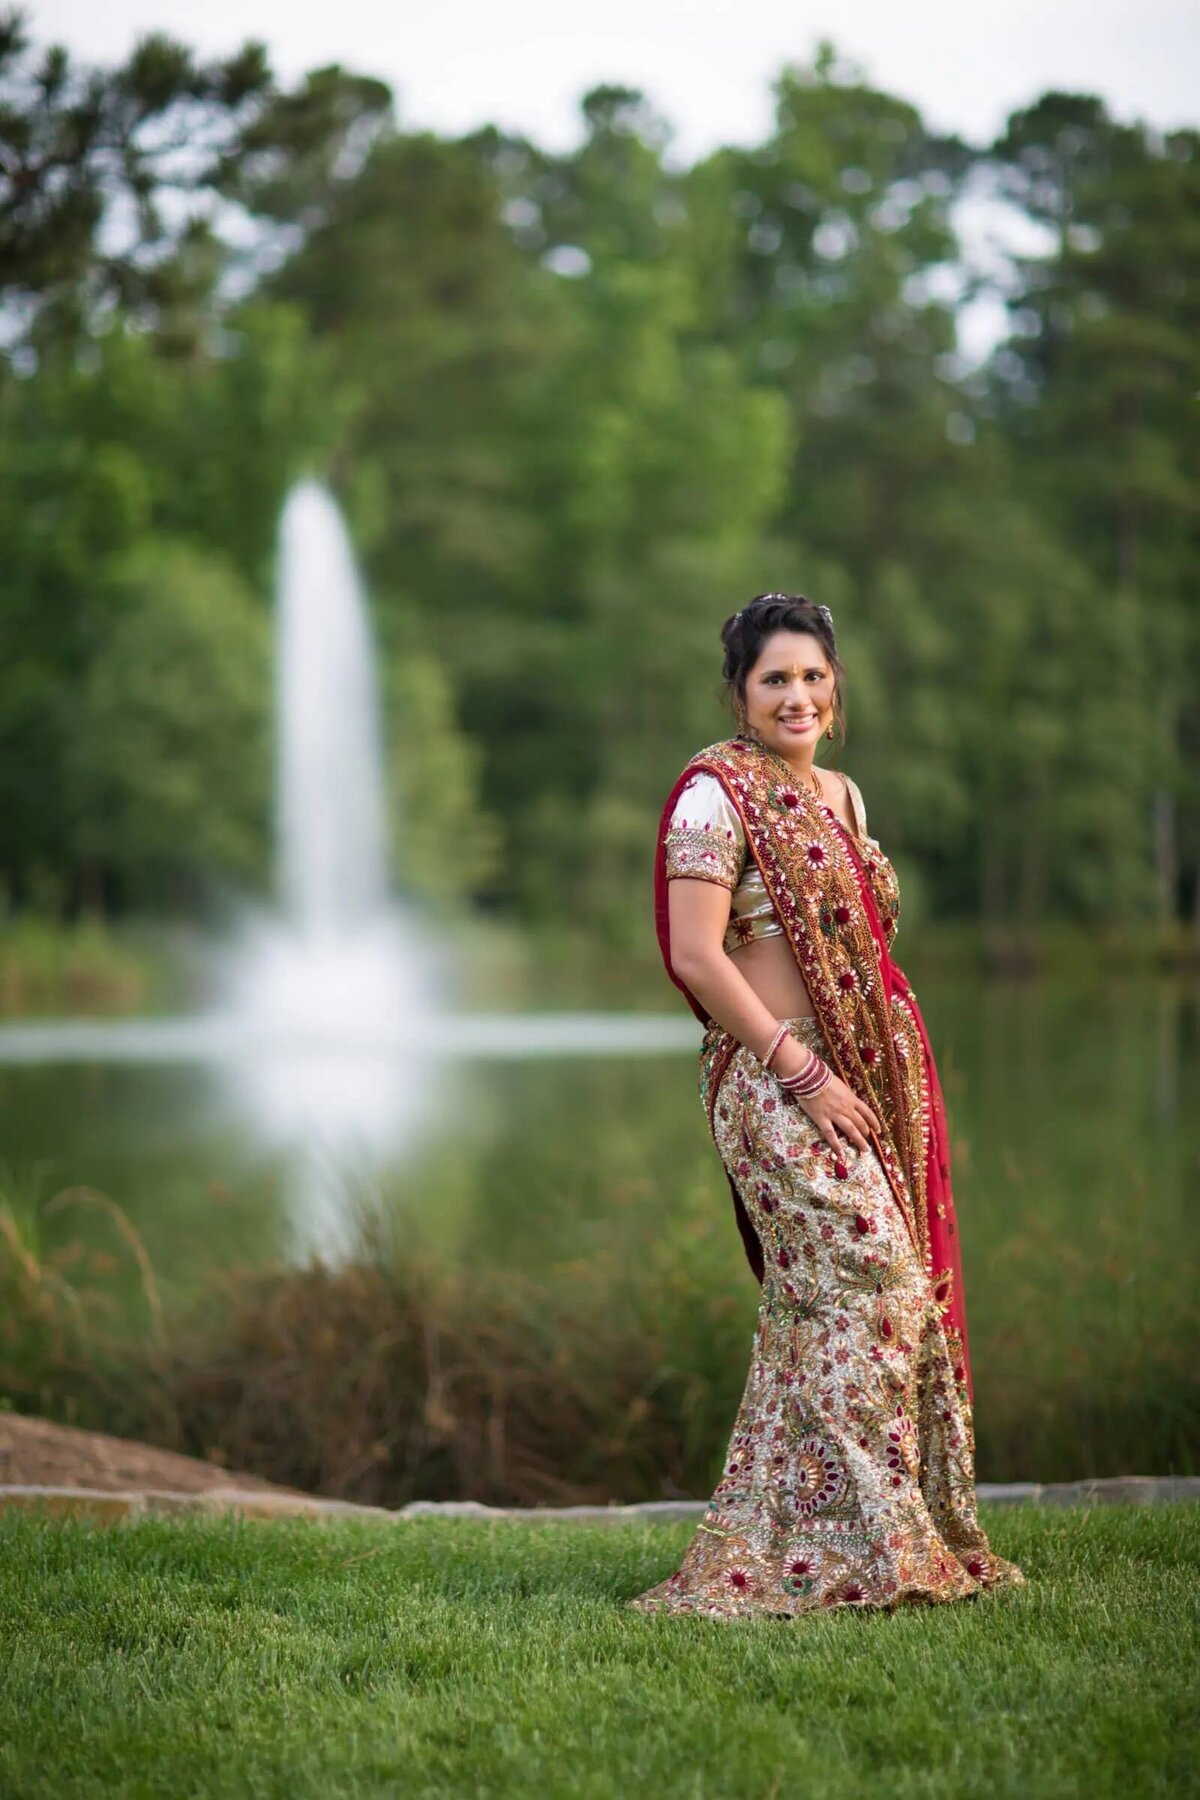 A bride in traditional Indian clothes standing in front of a lake